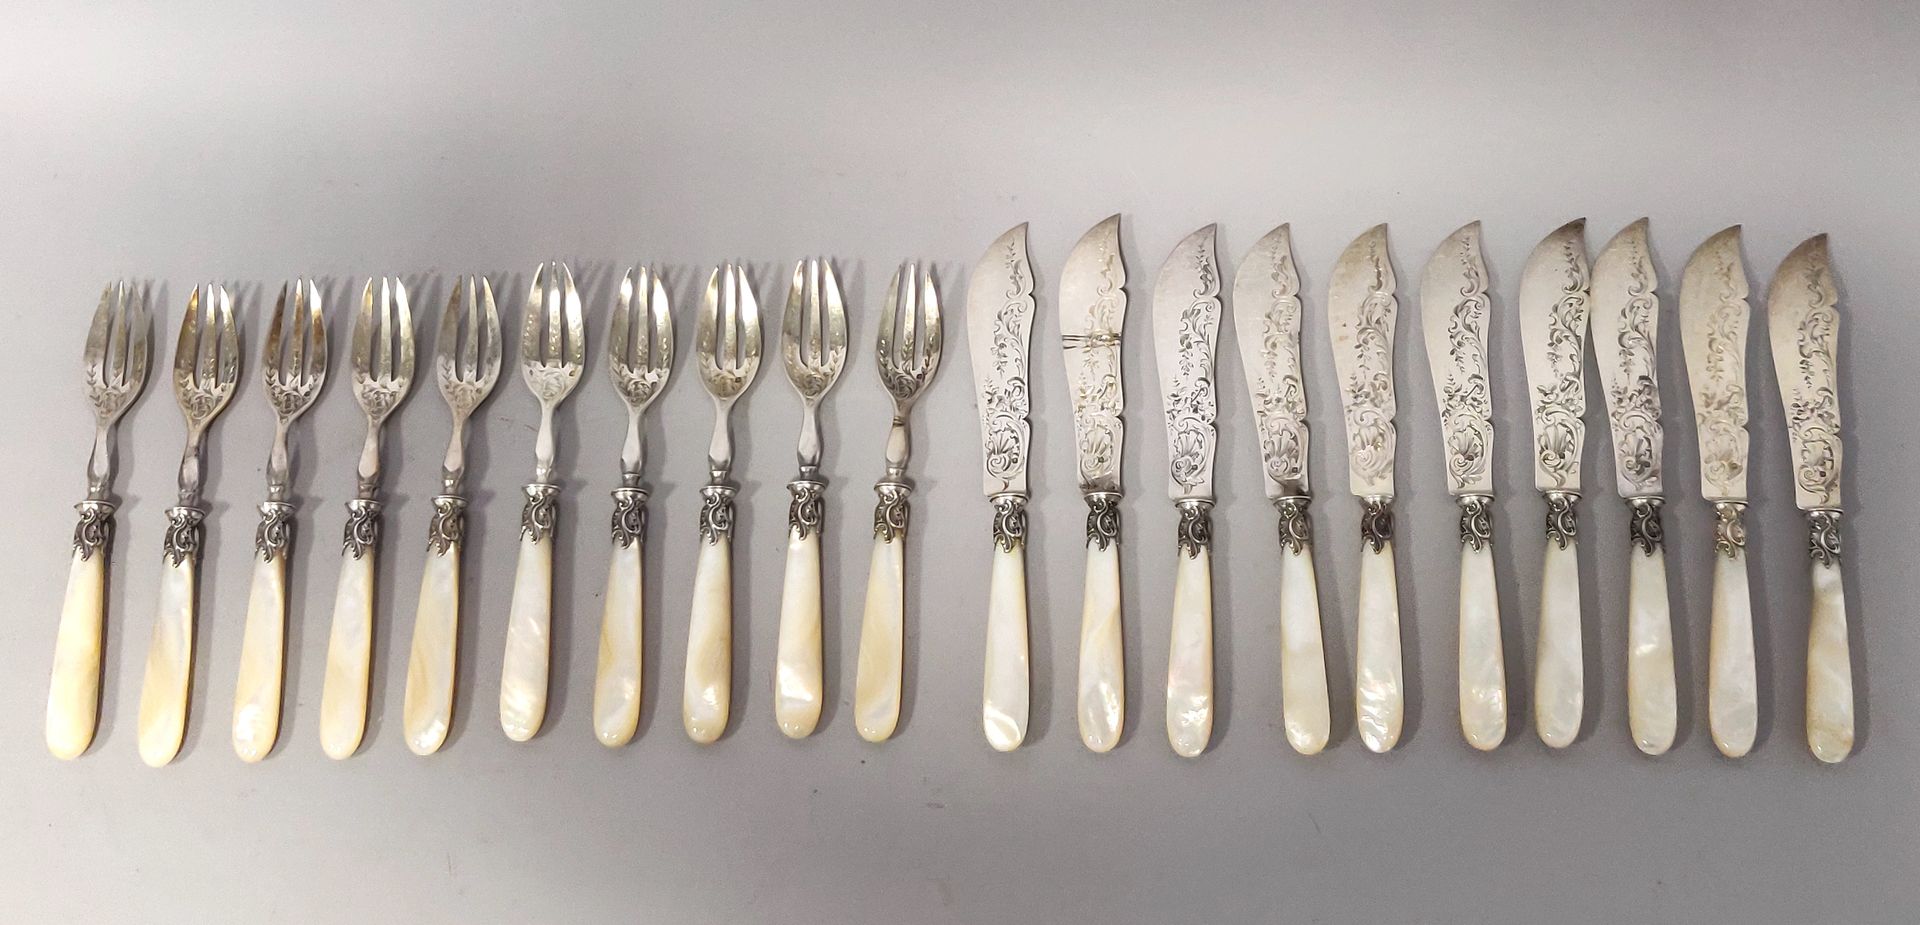 Null Set of 10 silver forks and 10 fish knives with engraved decoration of folia&hellip;